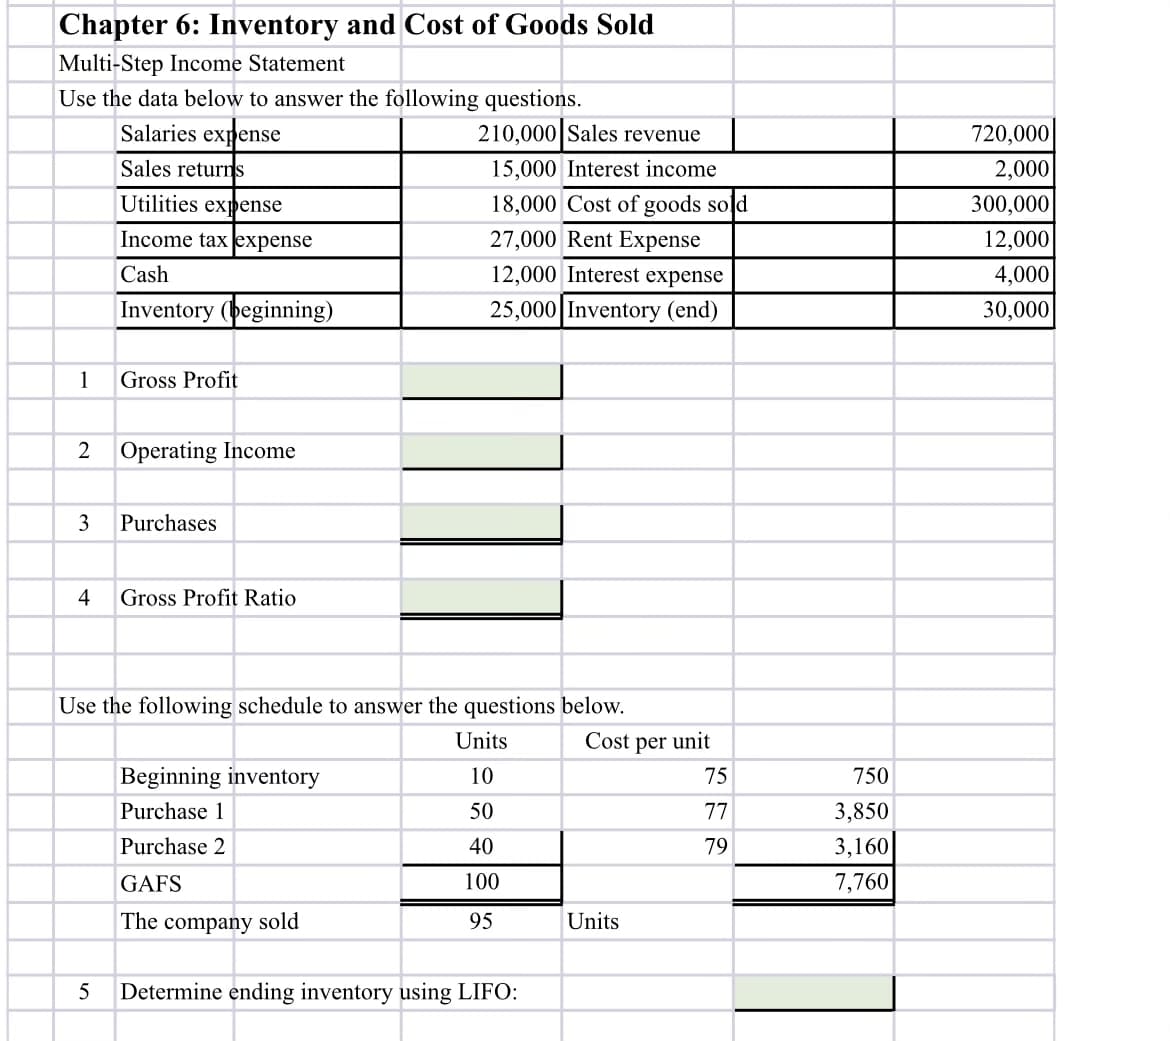 Chapter 6: Inventory and Cost of Goods Sold
Multi-Step Income Statement
Use the data below to answer the following questions.
720,000
2,000
Salaries expense
210,000|Sales revenue
Sales returns
Utilities expense
15,000 Interest income
18,000 Cost of goods sold
300,000
Income tax expense
27,000 Rent Expense
12,000
4,000
30,000
Cash
12,000 Interest expense
Inventory (beginning)
25,000 Inventory (end)
1
Gross Profit
2
Operating Income
Purchases
4
Gross Profit Ratio
Use the following schedule to answer the questions below.
Units
Cost
per unit
Beginning inventory
10
75
750
Purchase 1
50
77
3,850
Purchase 2
40
79
3,160
GAFS
100
7,760
The company sold
95
Units
Determine ending inventory using LIFO:
3.
